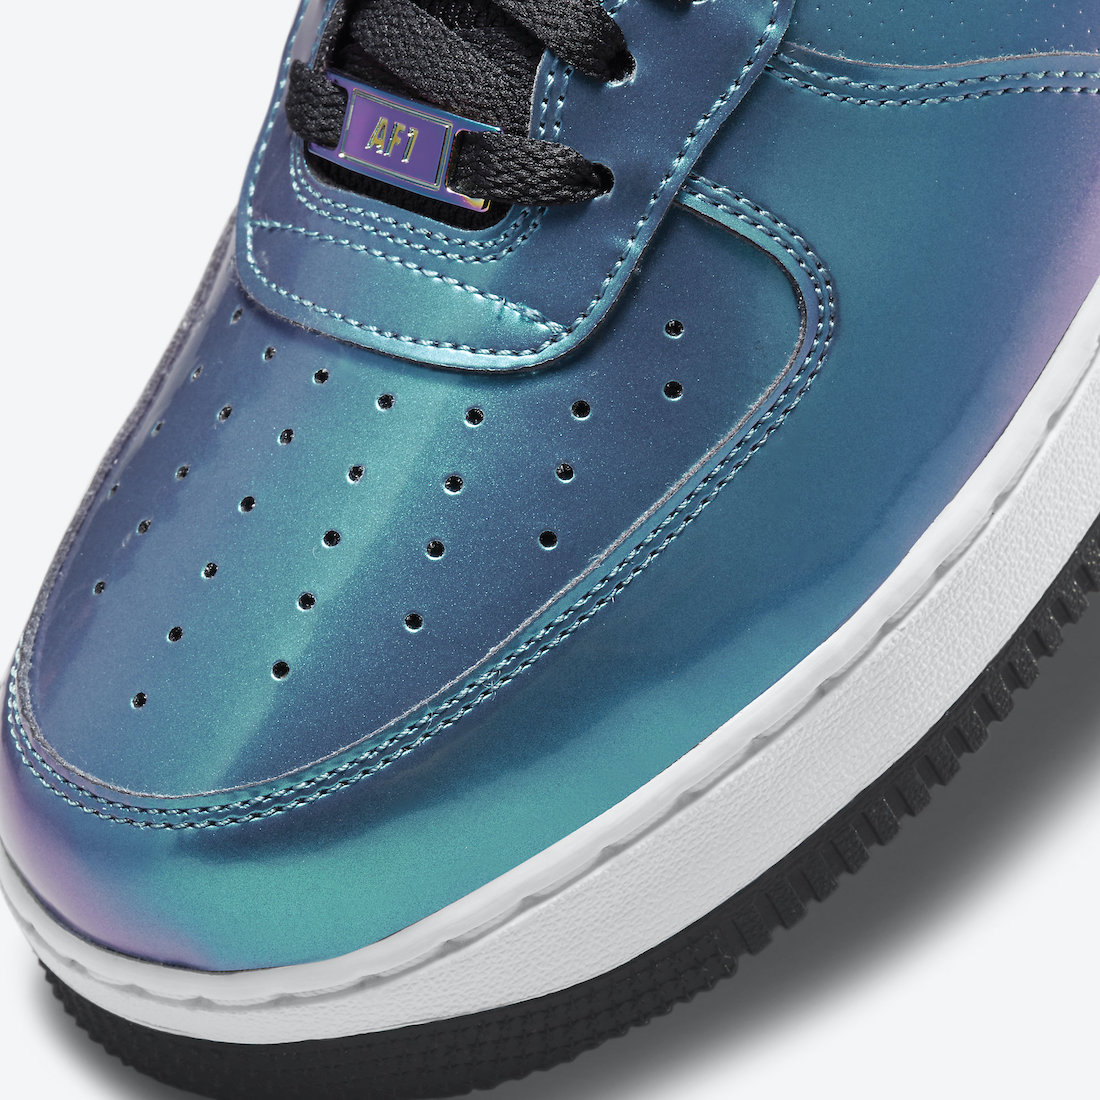 Nike Air Force 1 Low, Nike Air Force 1, Nike Air, NIKE, Iridescent, FORCE 1, Air Force 1